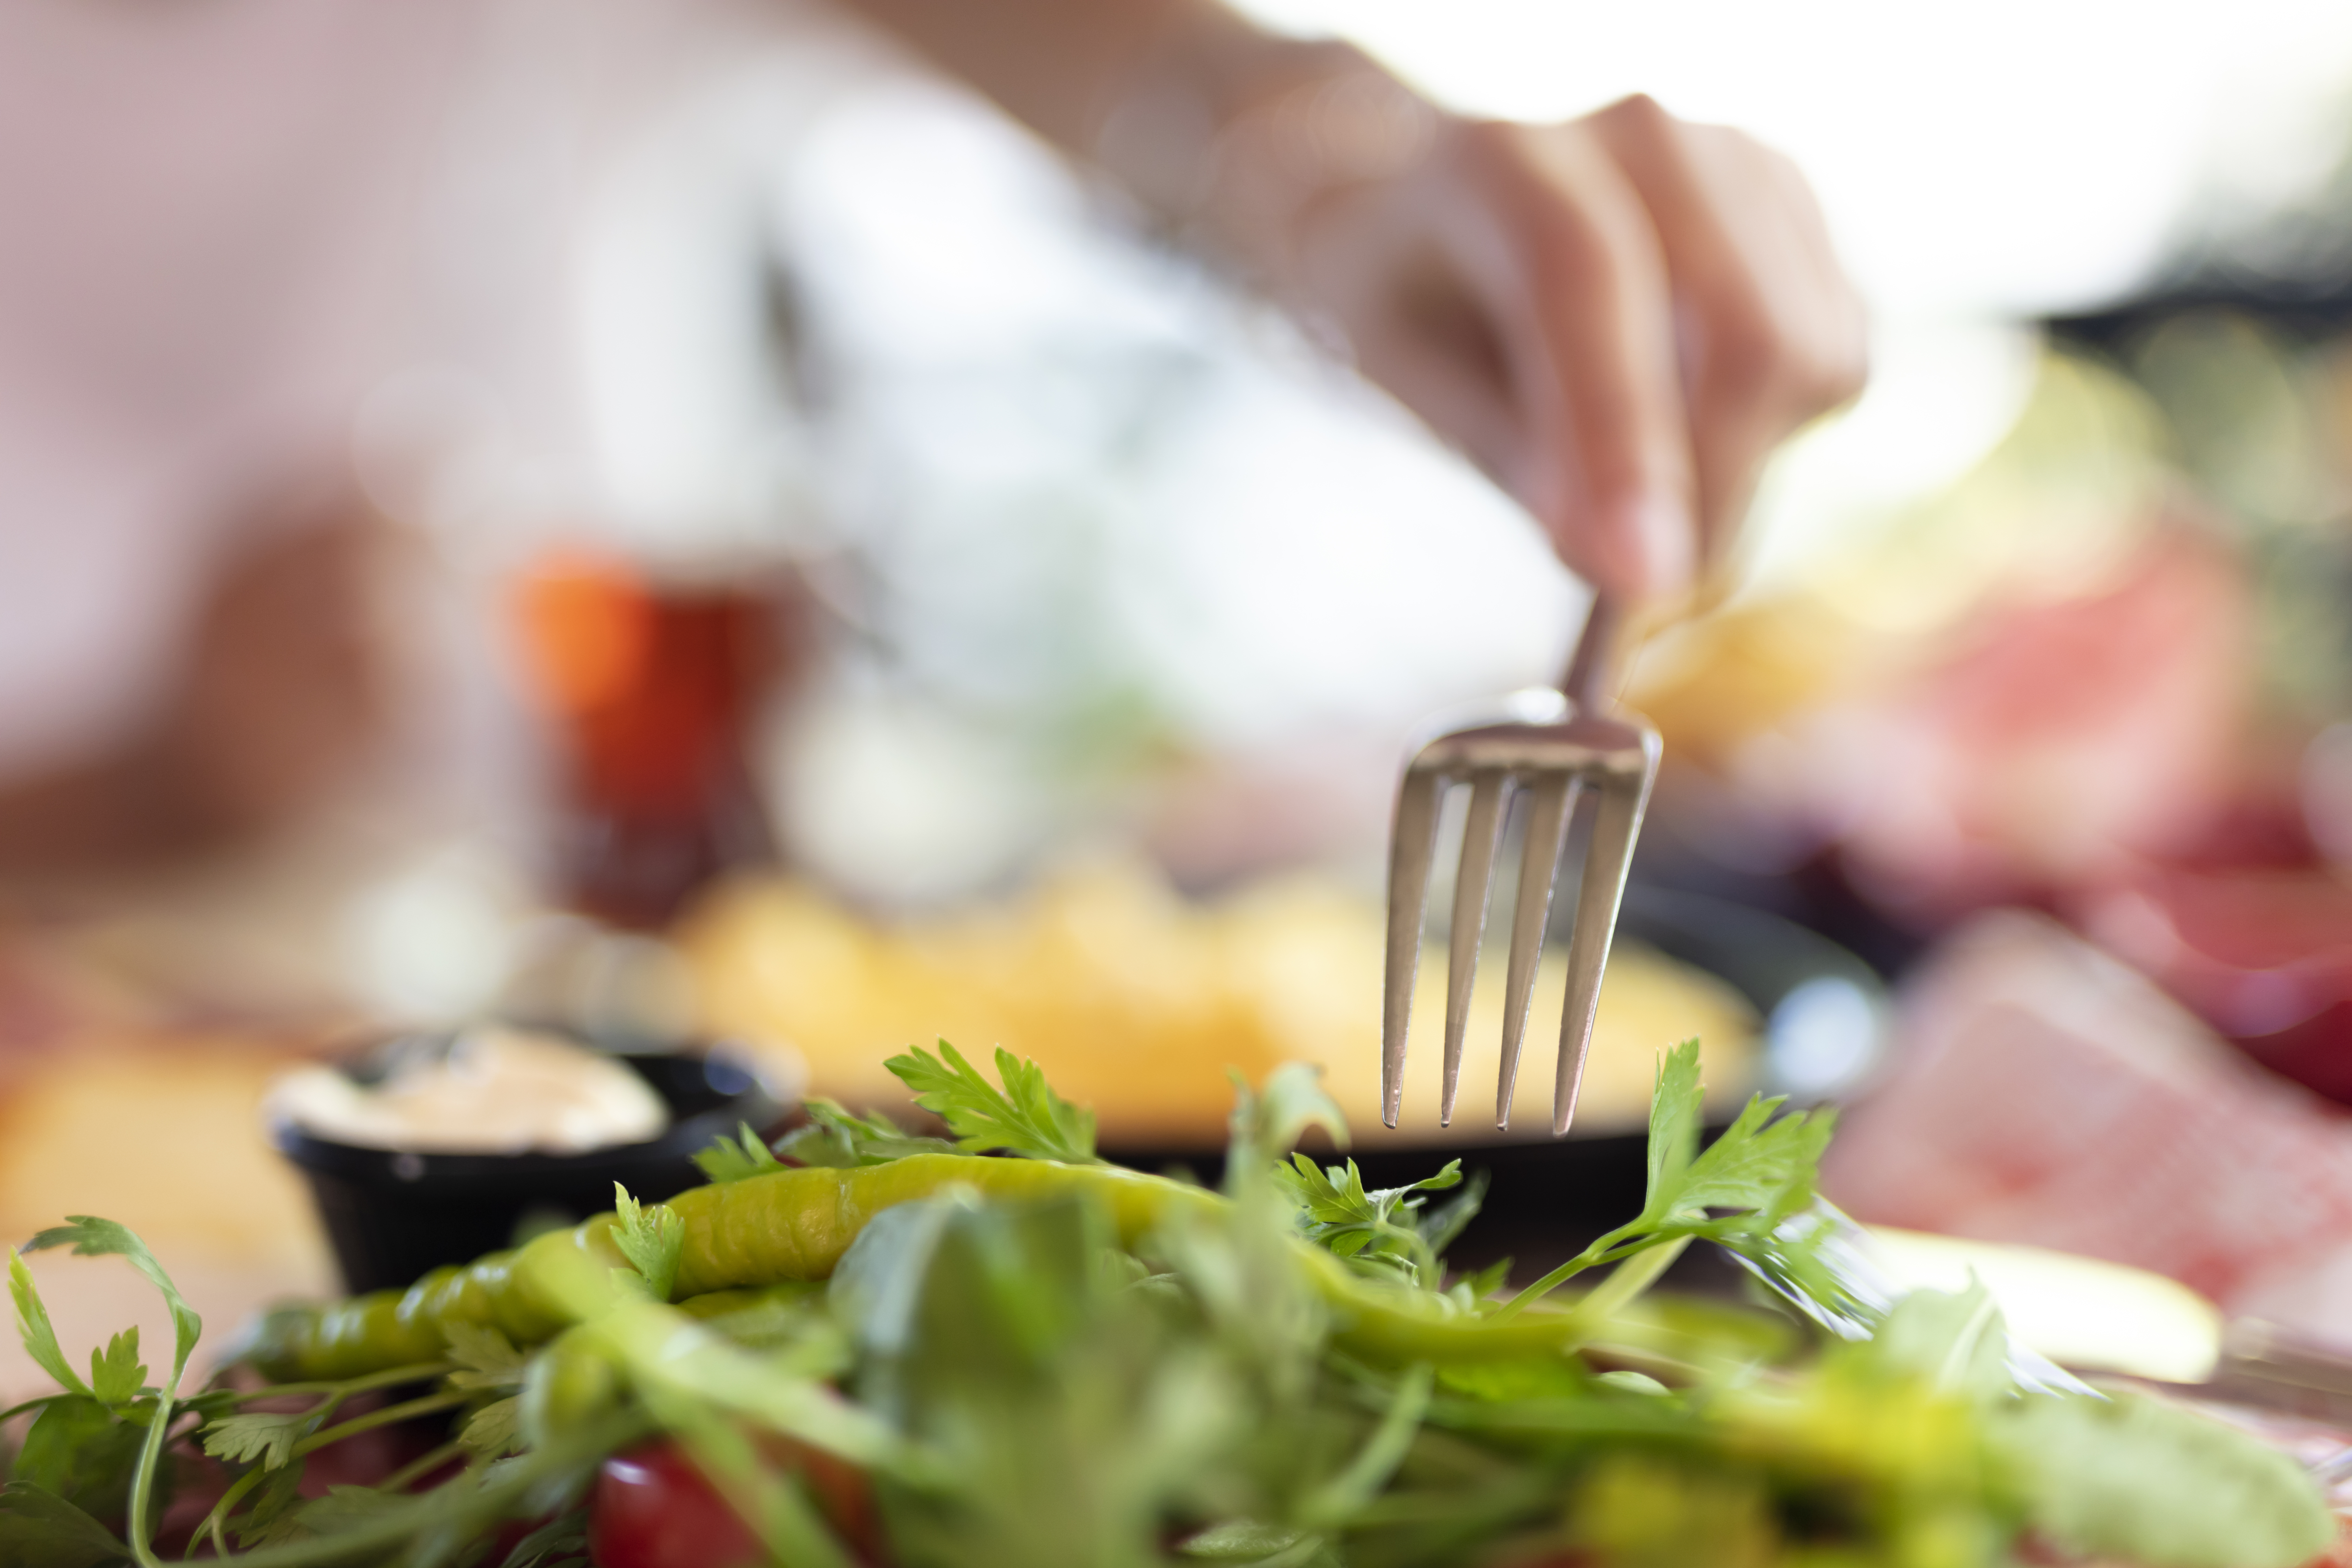 Providing healthy salad options for the kitchen is one way to encourage wellness.